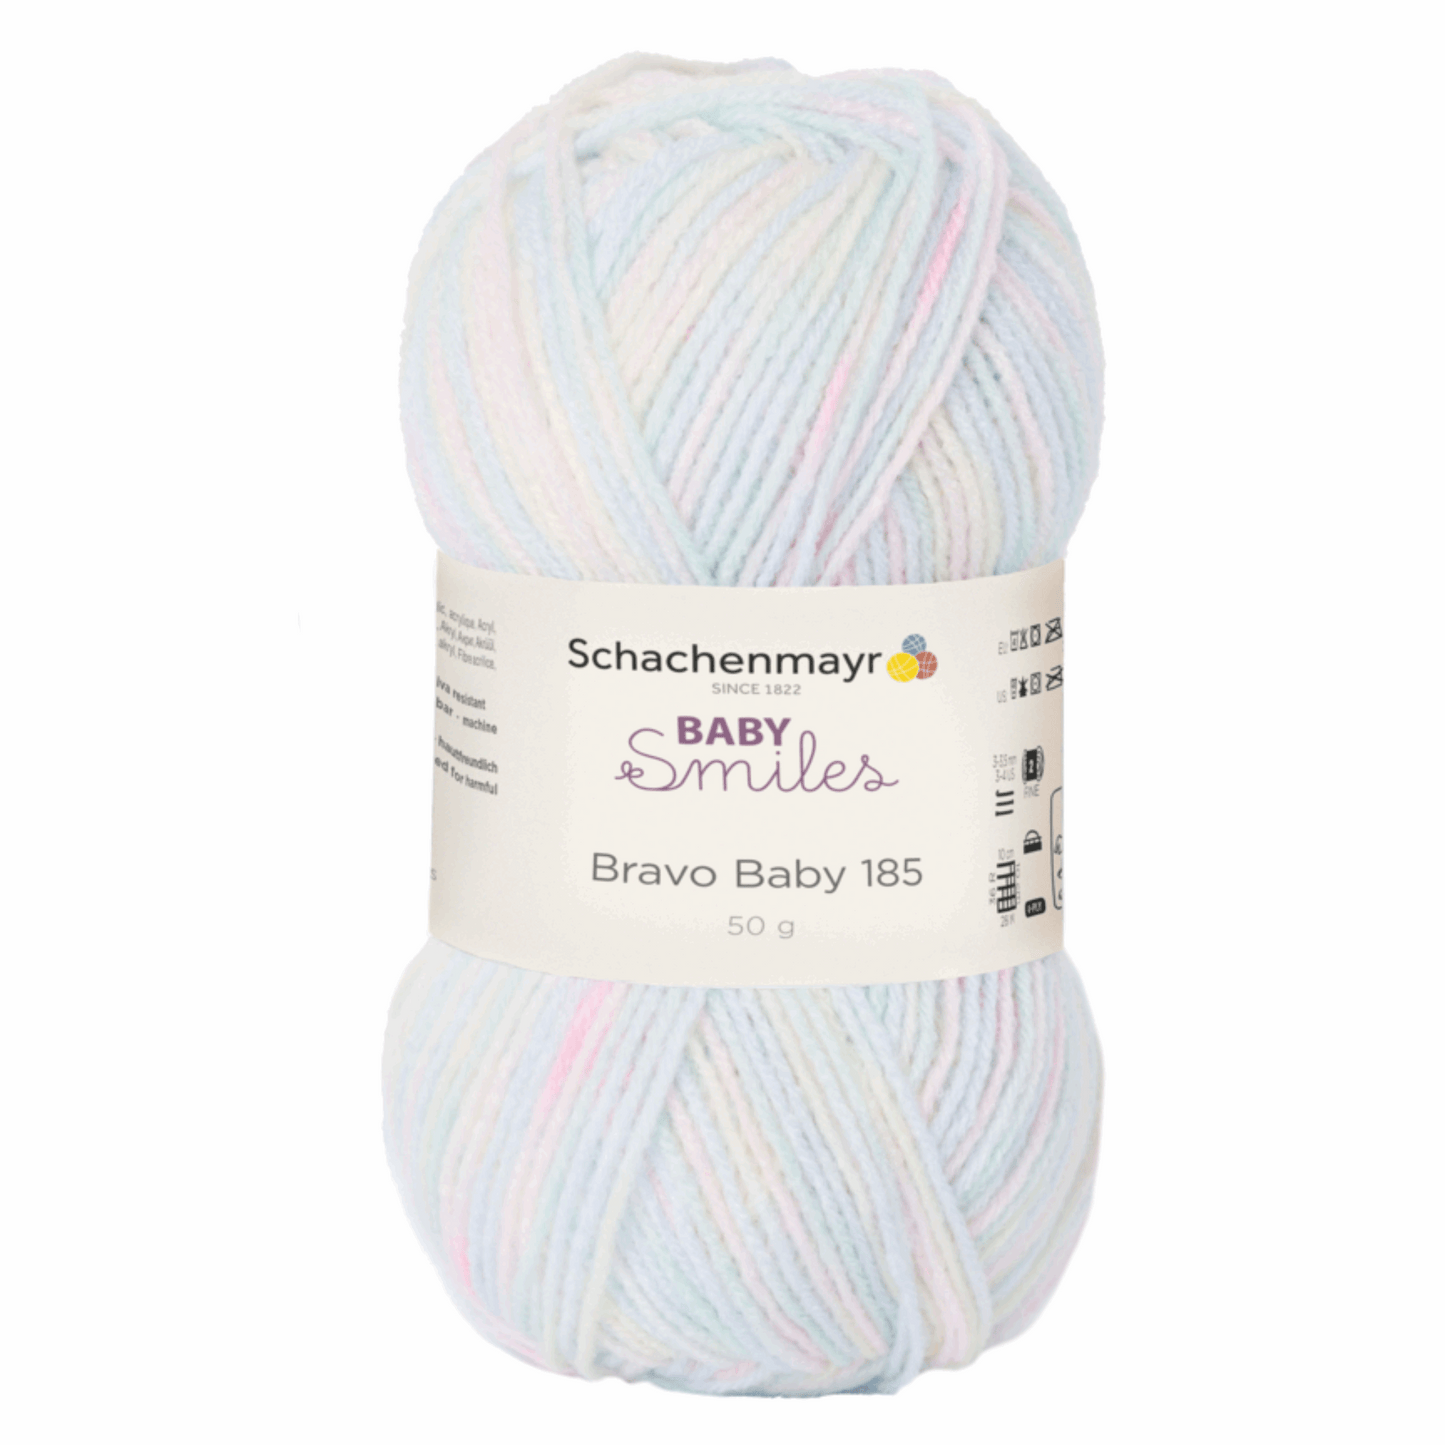 Bravo Baby 185 50g - Baby, 90212, Farbe 183, pastell colo